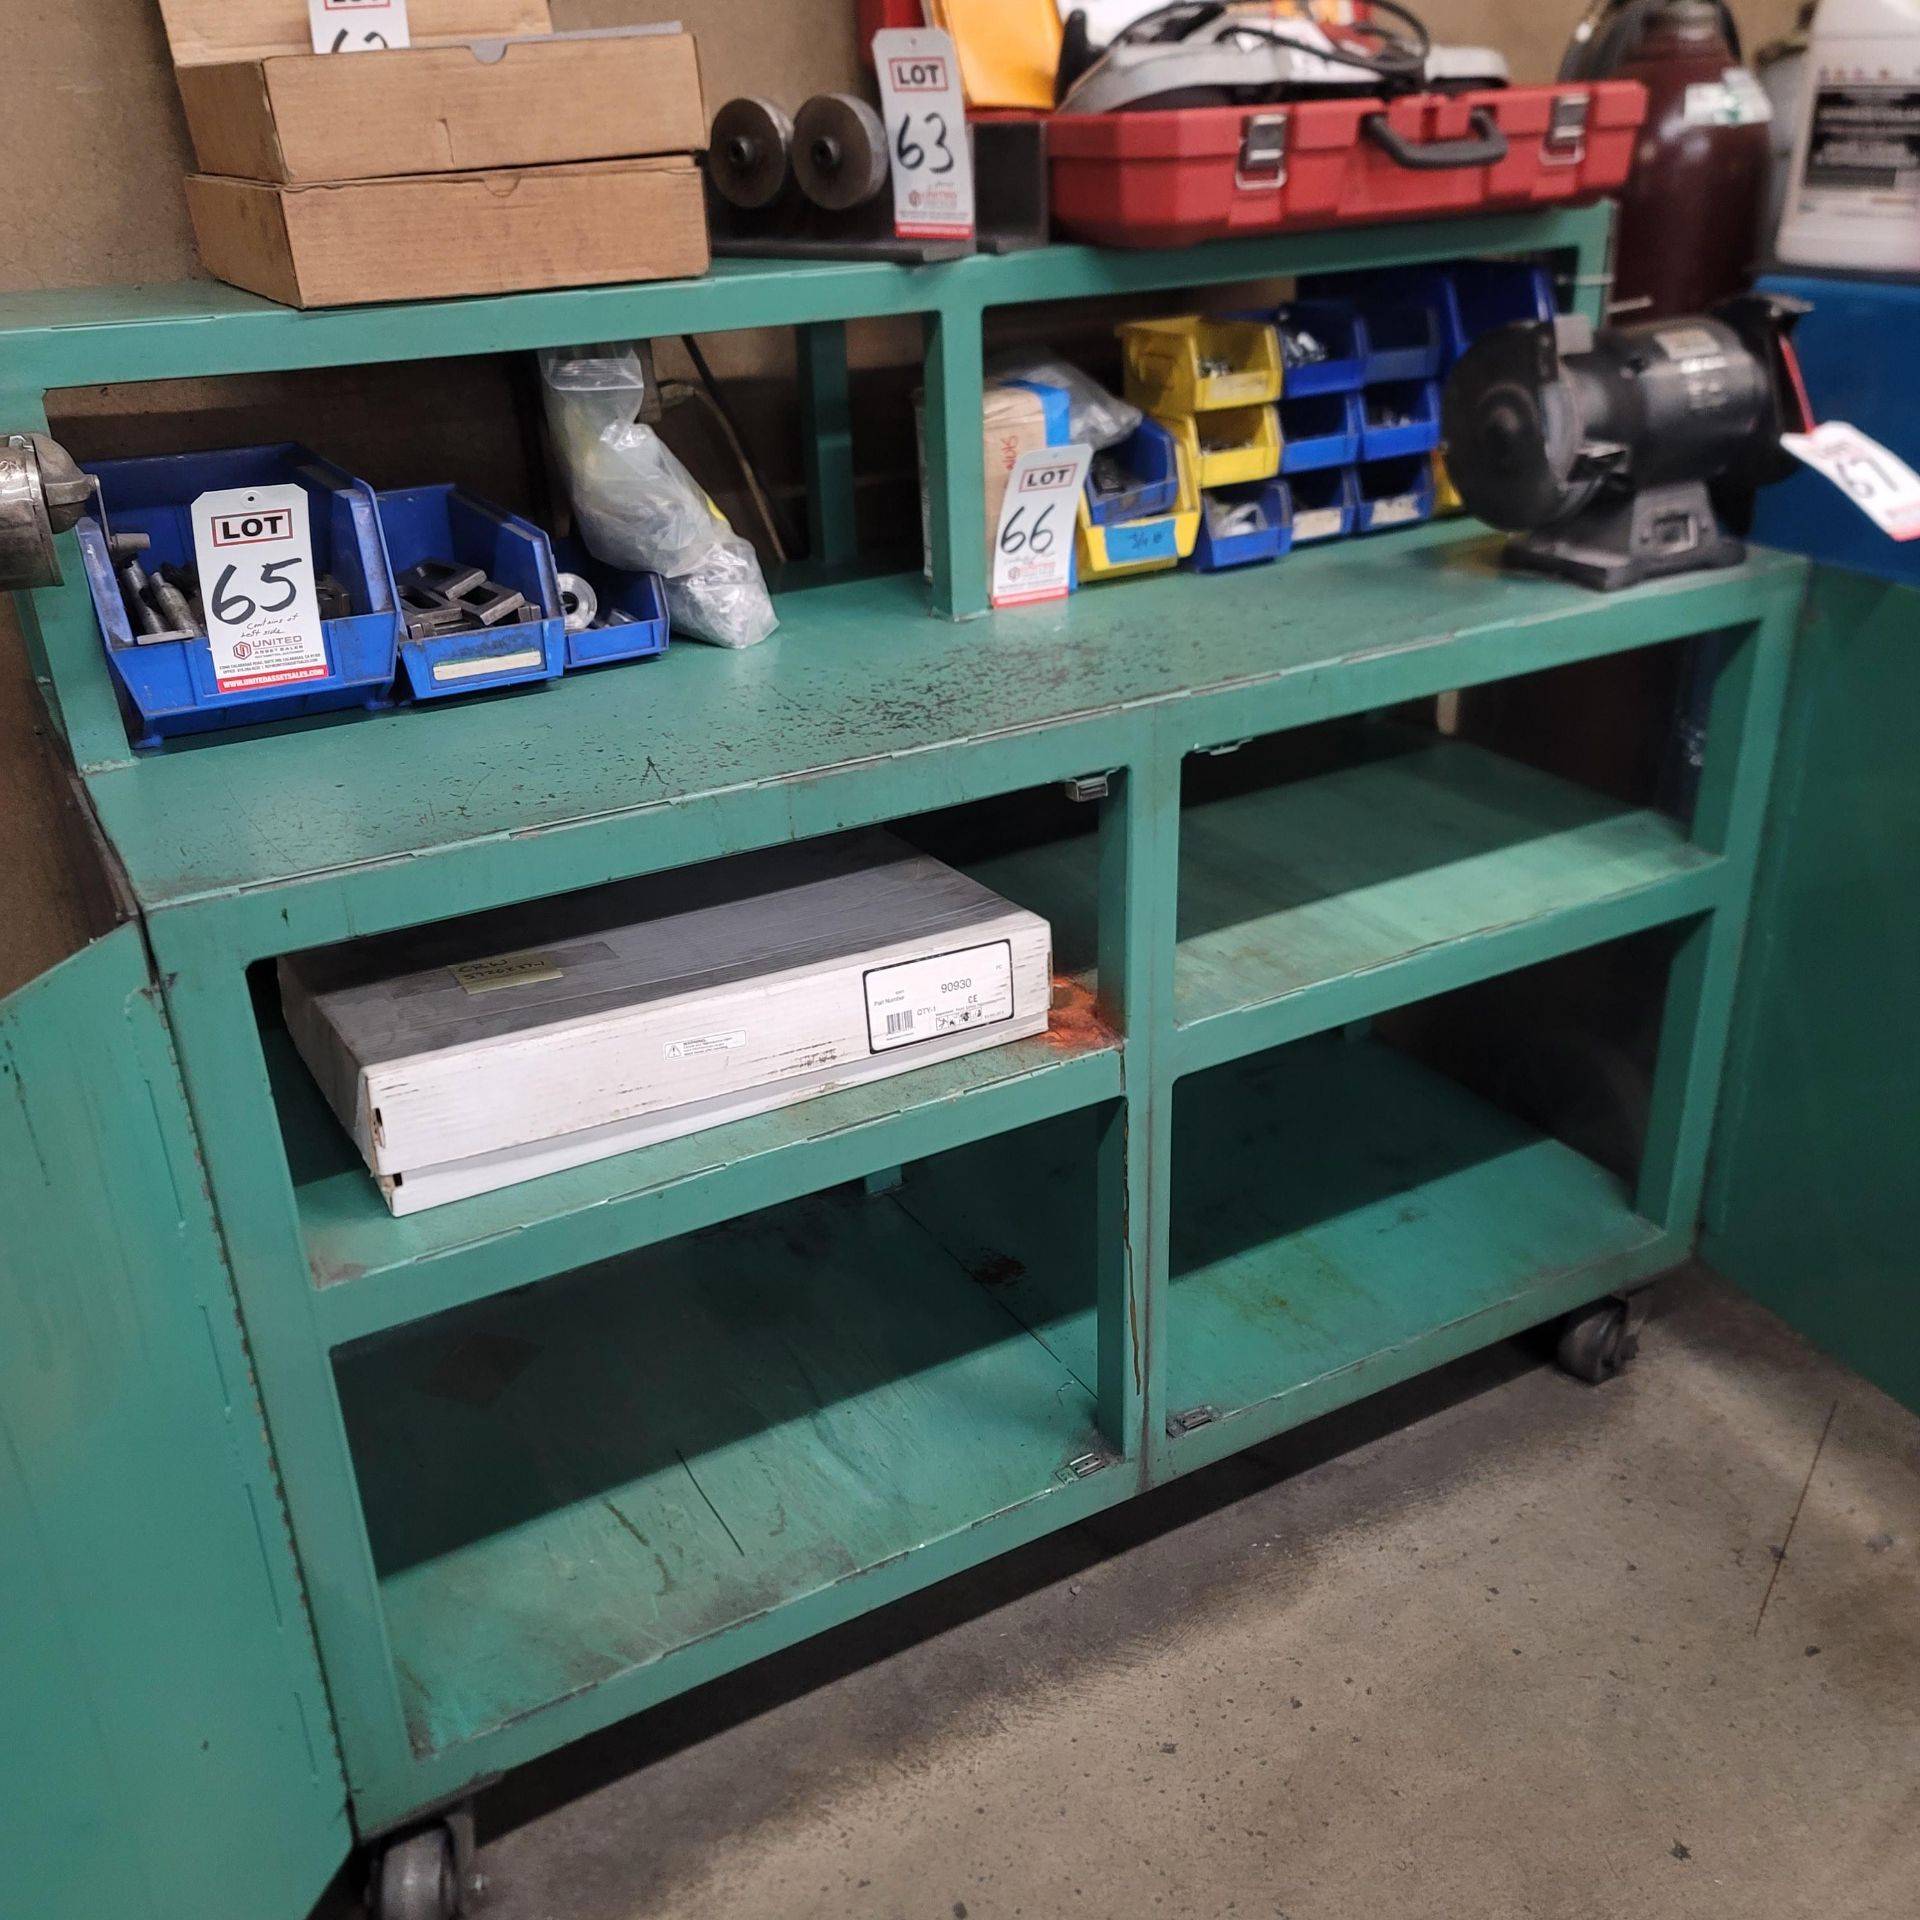 STEEL CABINET WORKTOP W/ BACK SHELF, 5' X 2', ON CASTERS, CONTENTS NOT INCLUDED - Image 2 of 2